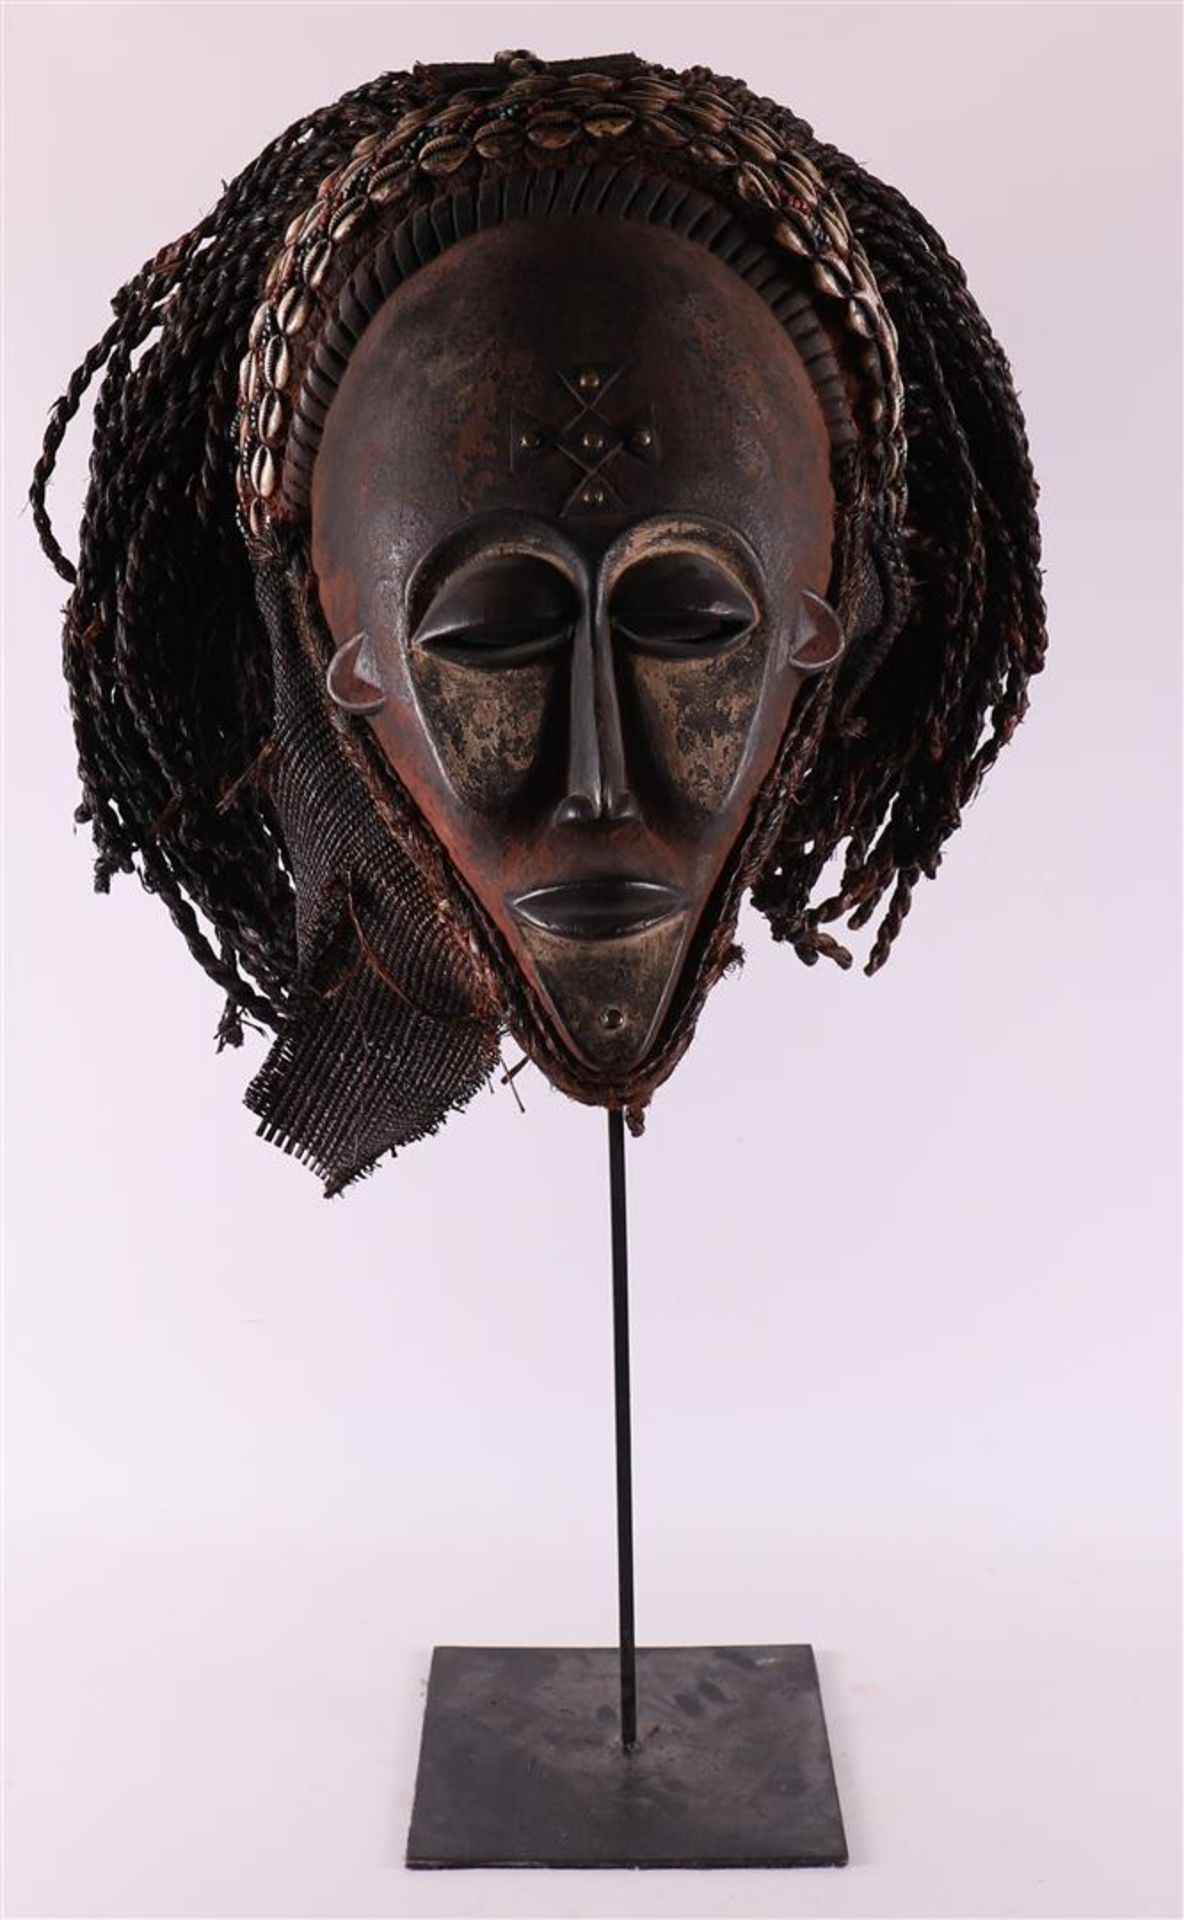 Ethnographic/tribal. A wooden mask, Chokwe, Angola, Africa, 2nd half of the 20th